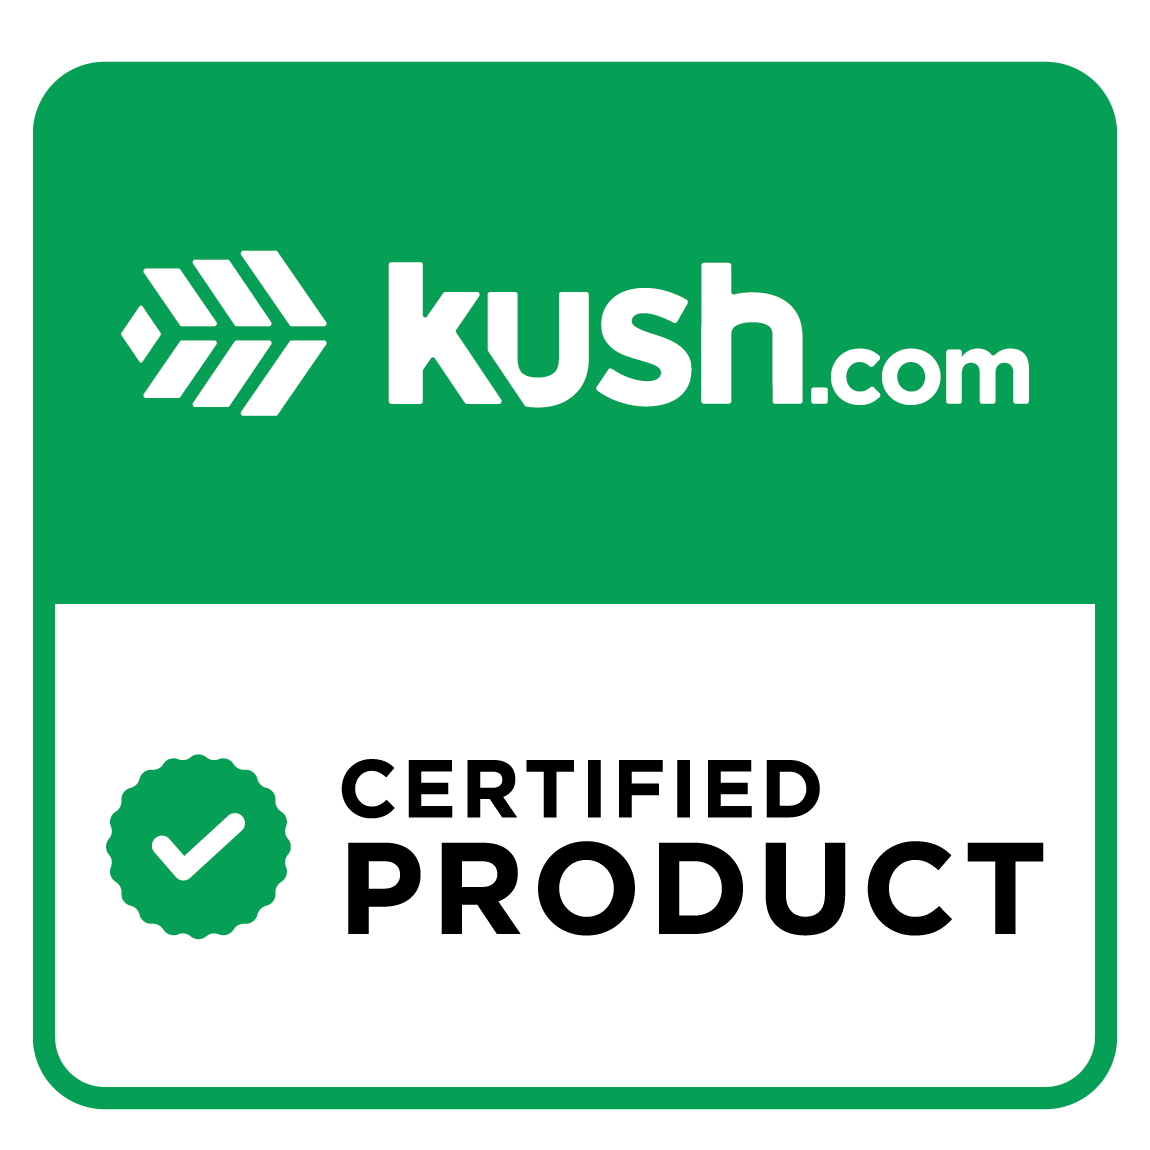 Kush Certified: Requirements & Getting Started